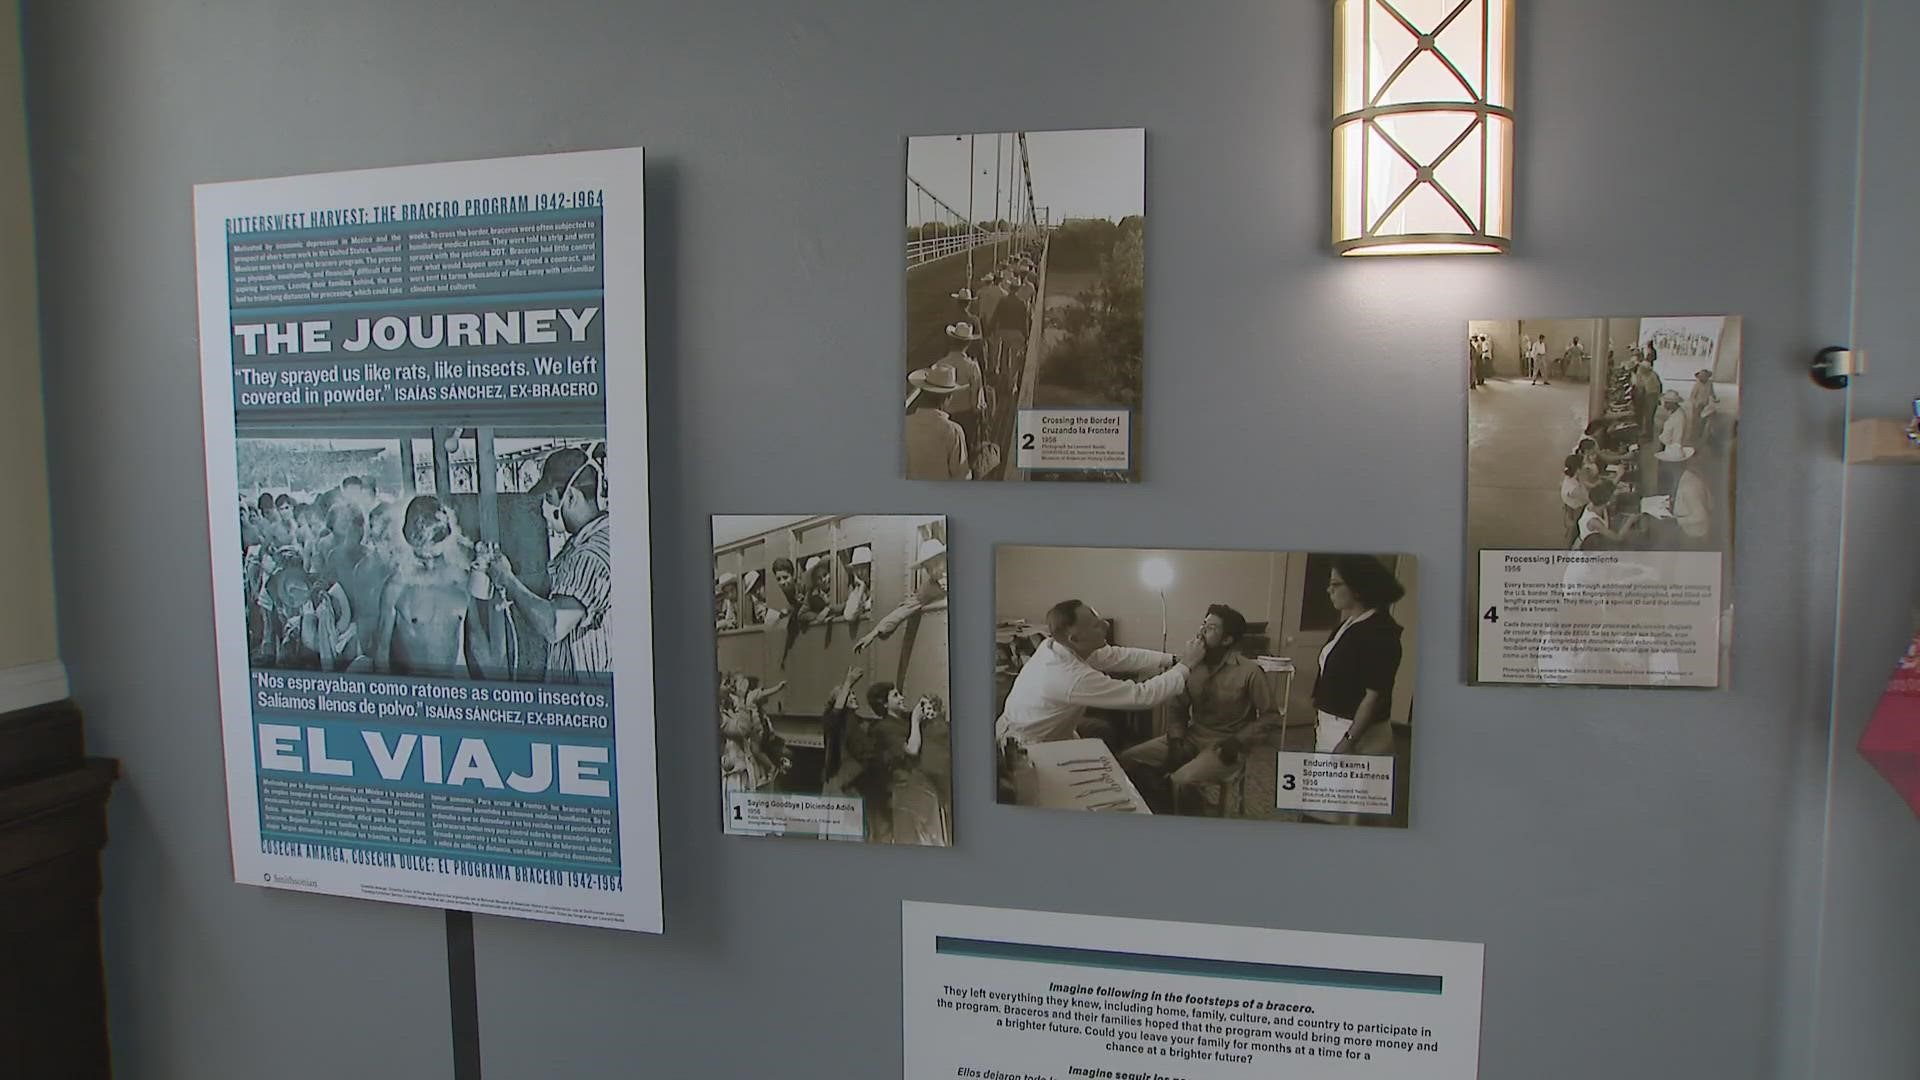 An exhibit called “Bittersweet Harvest: The Bracero Program, 1942-1964,” helps detail the journey of Mexican migrant workers during and after World War II.